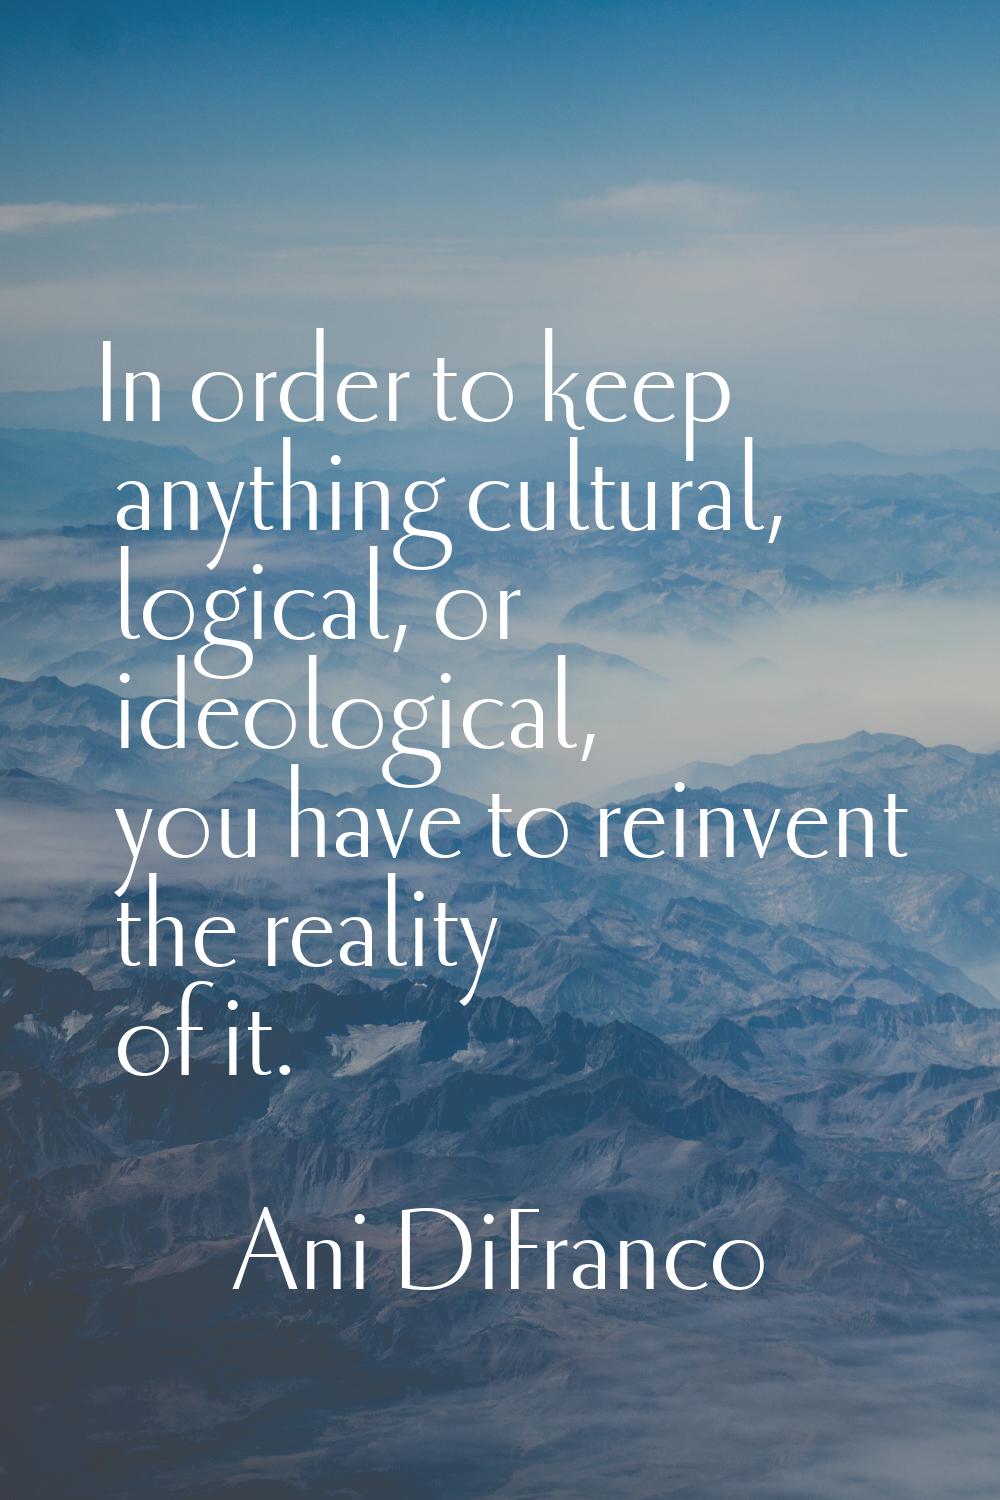 In order to keep anything cultural, logical, or ideological, you have to reinvent the reality of it